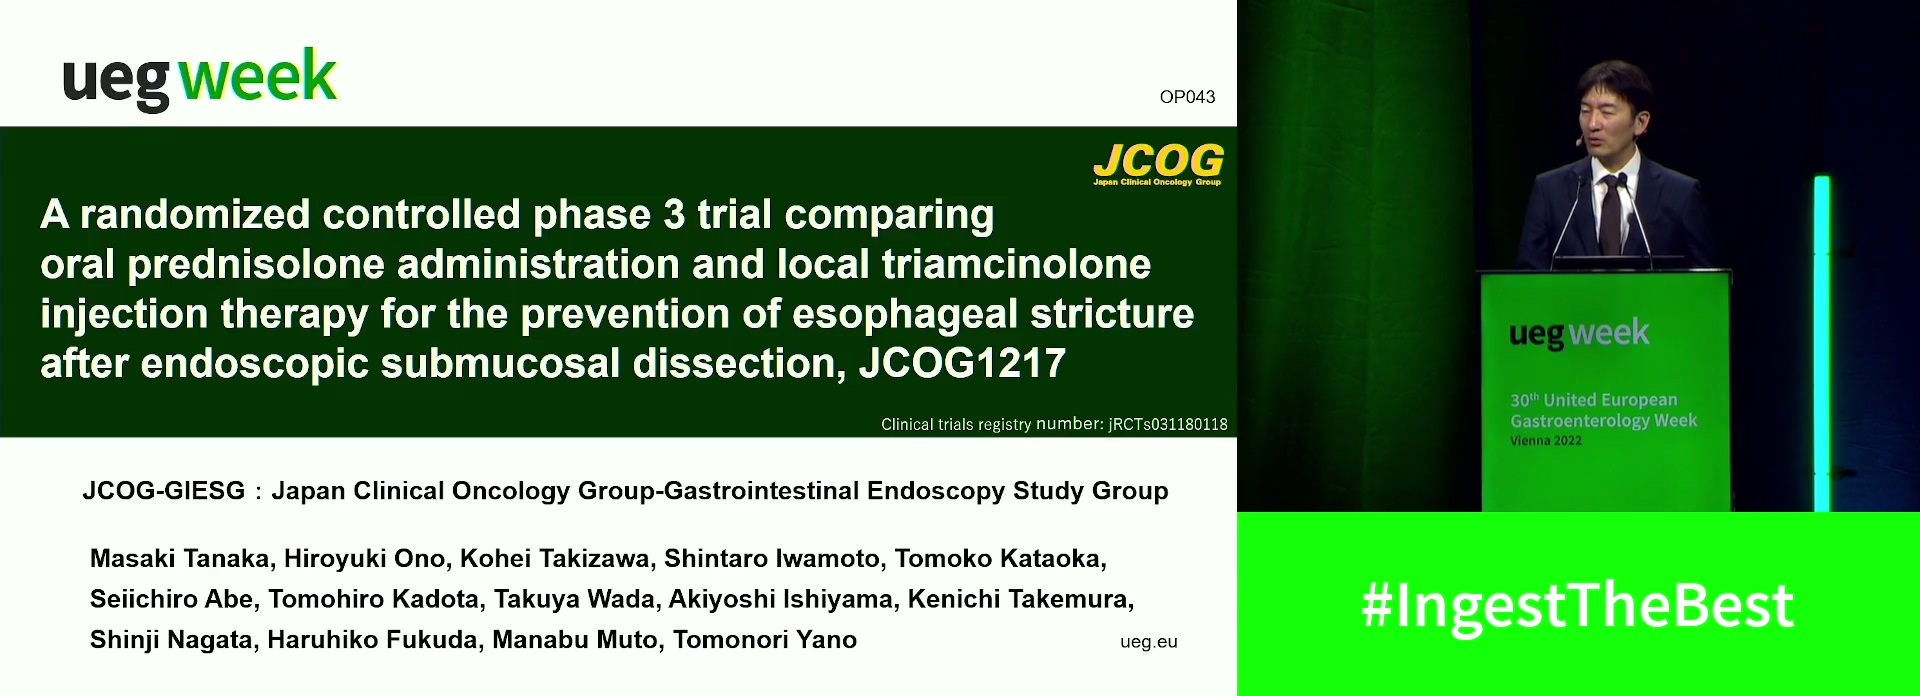 A RANDOMIZED CONTROLLED PHASE 3 TRIAL COMPARING ORAL PREDNISOLONE ADMINISTRATION AND LOCAL TRIAMCINOLONE INJECTION THERAPY FOR THE PREVENTION OF ESOPHAGEAL STRICTURE AFTER ENDOSCOPIC SUBMUCOSAL DISSECTION, JCOG1217